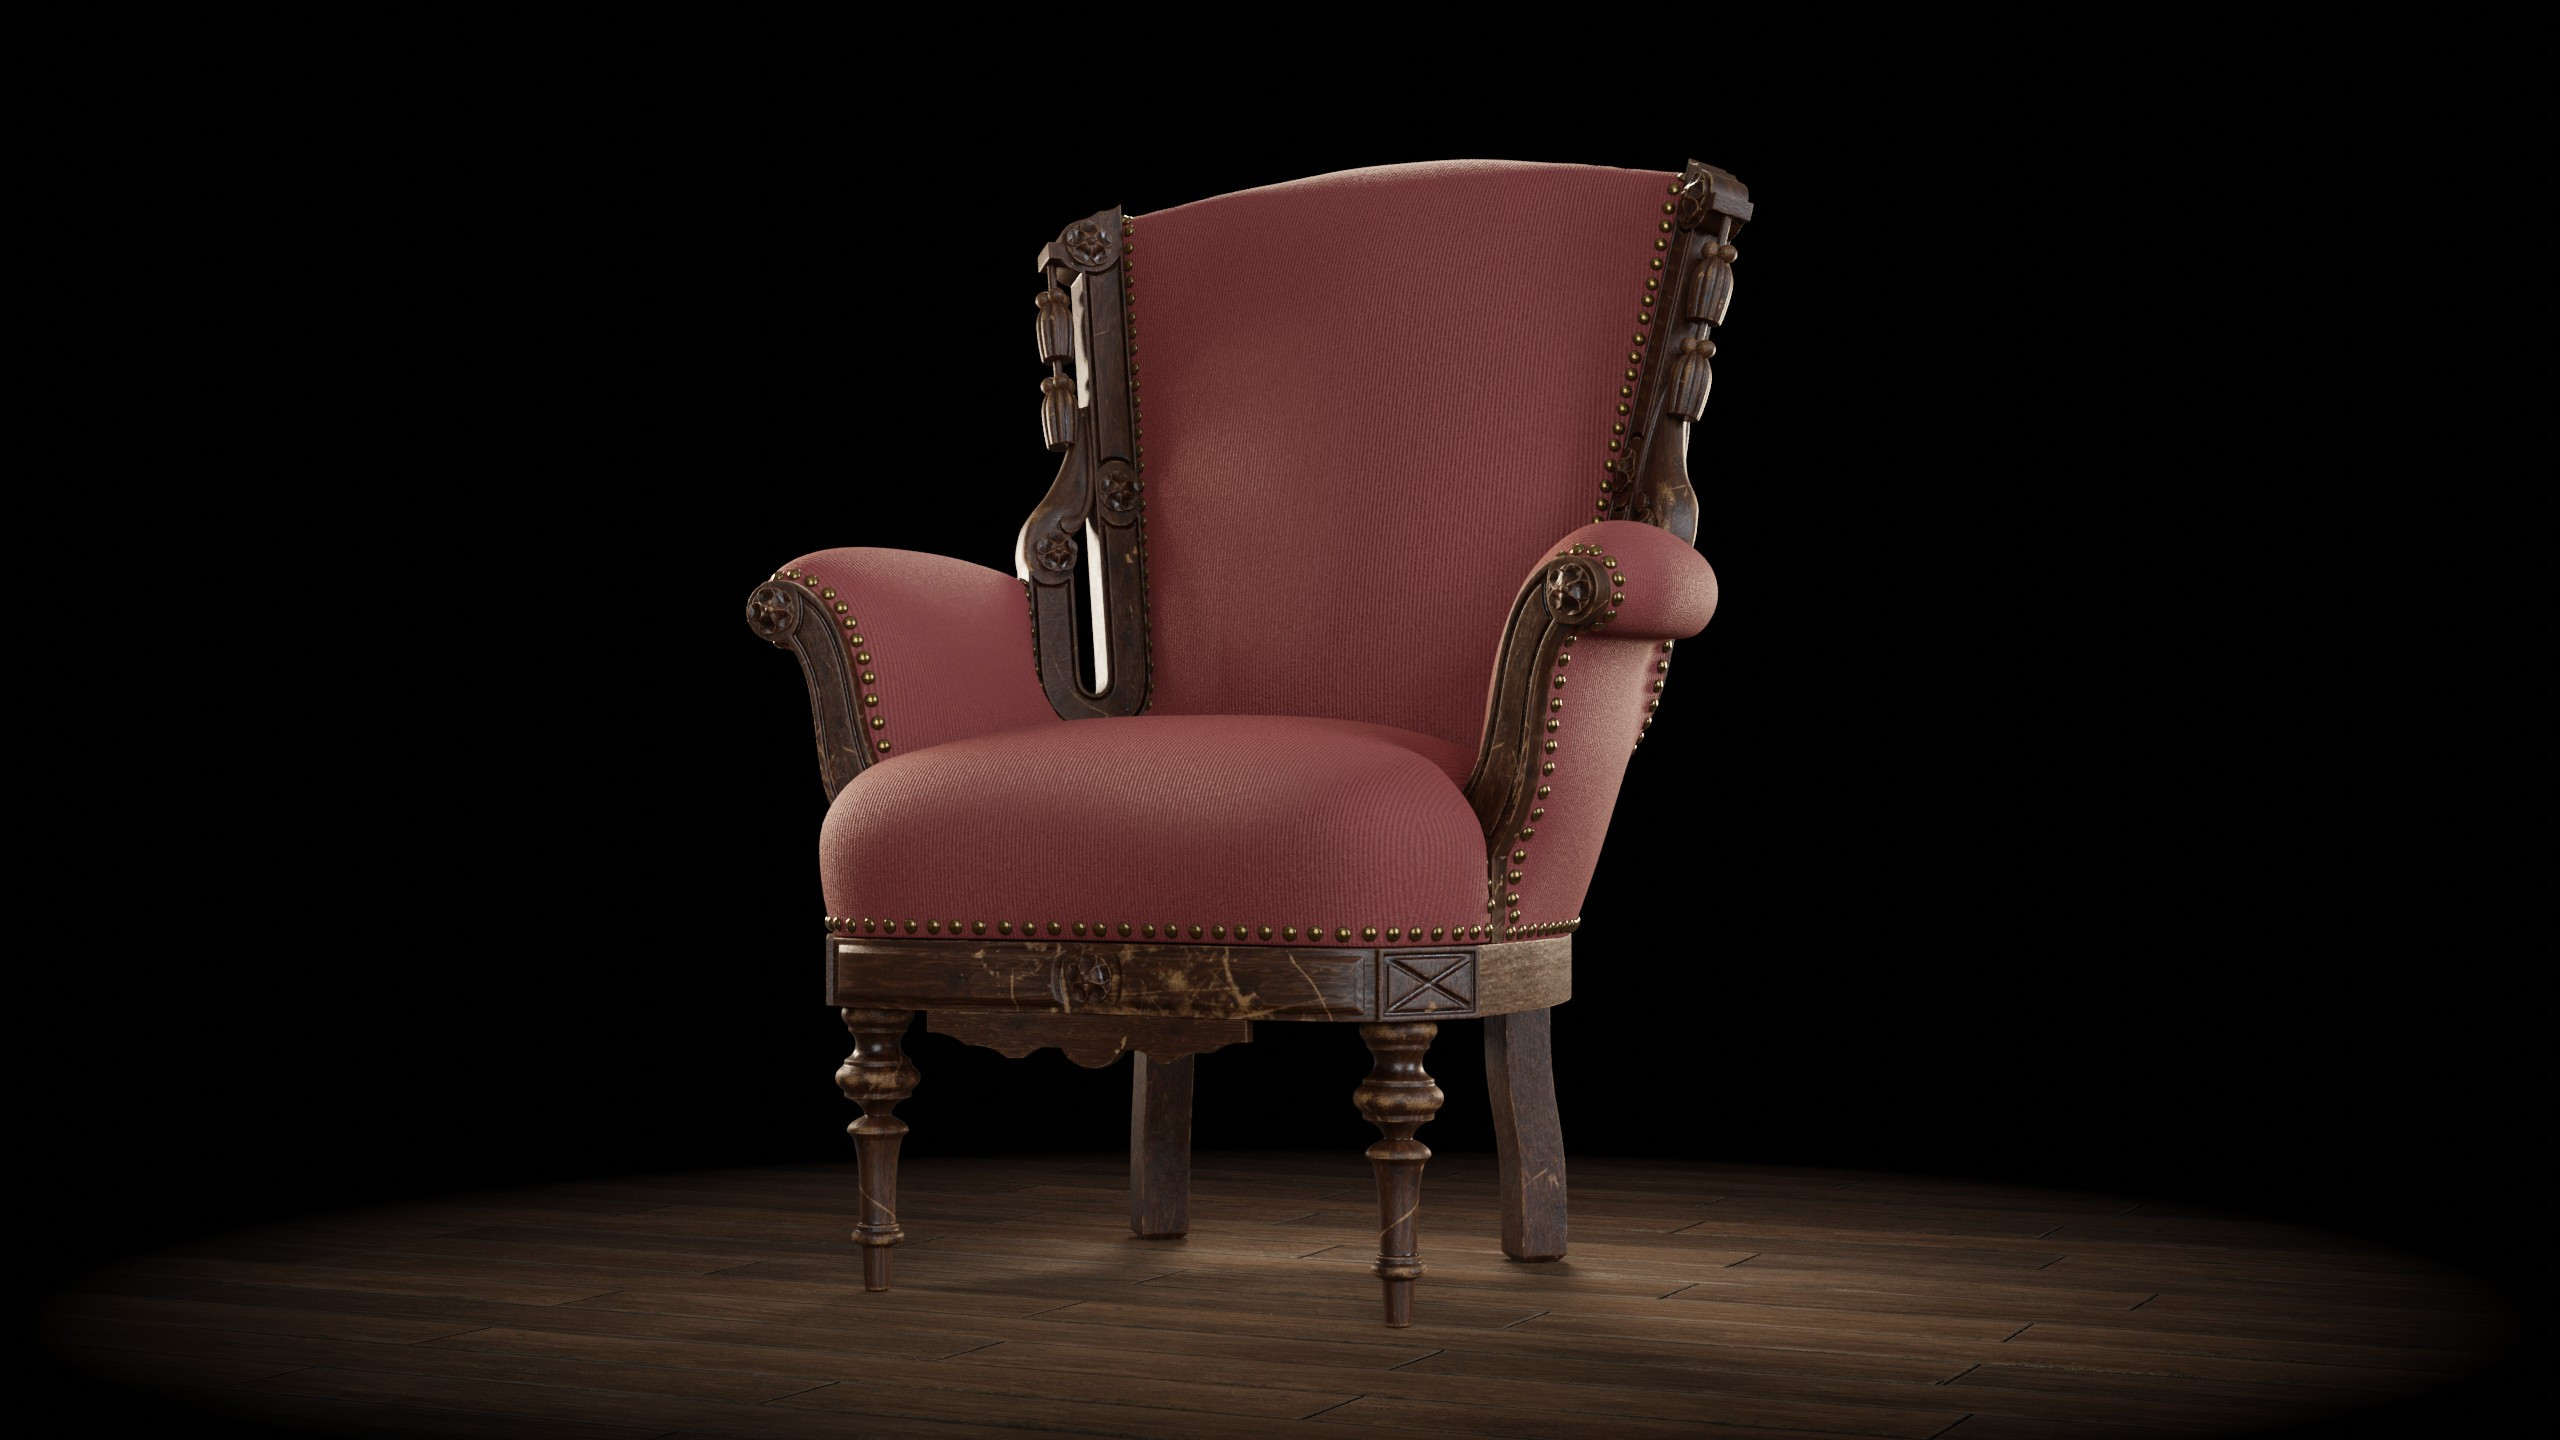 Find it here! https://artofkarlb.com/store/50yNK/antique-pink-chair